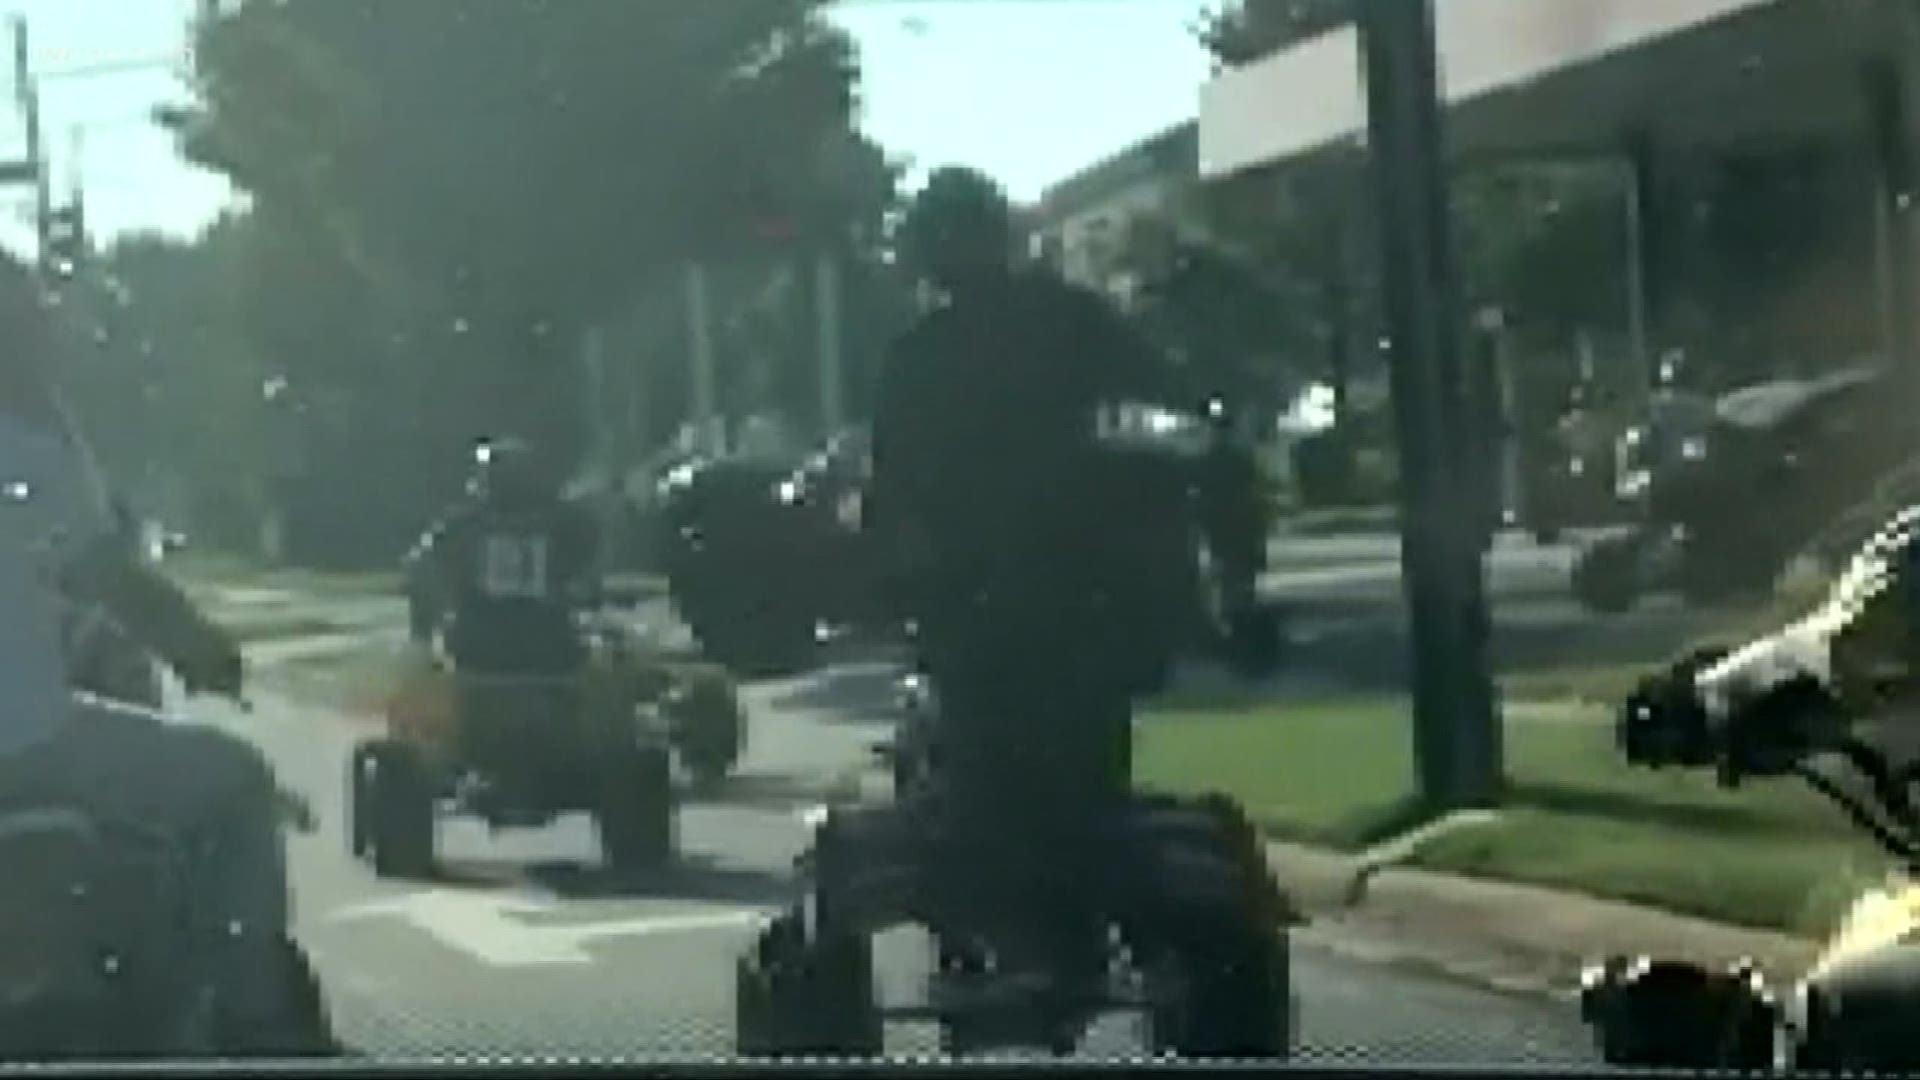 Video shows more than 20 ATVs and dirt bikes popping wheelies, riding on the sidewalk and tearing up property.